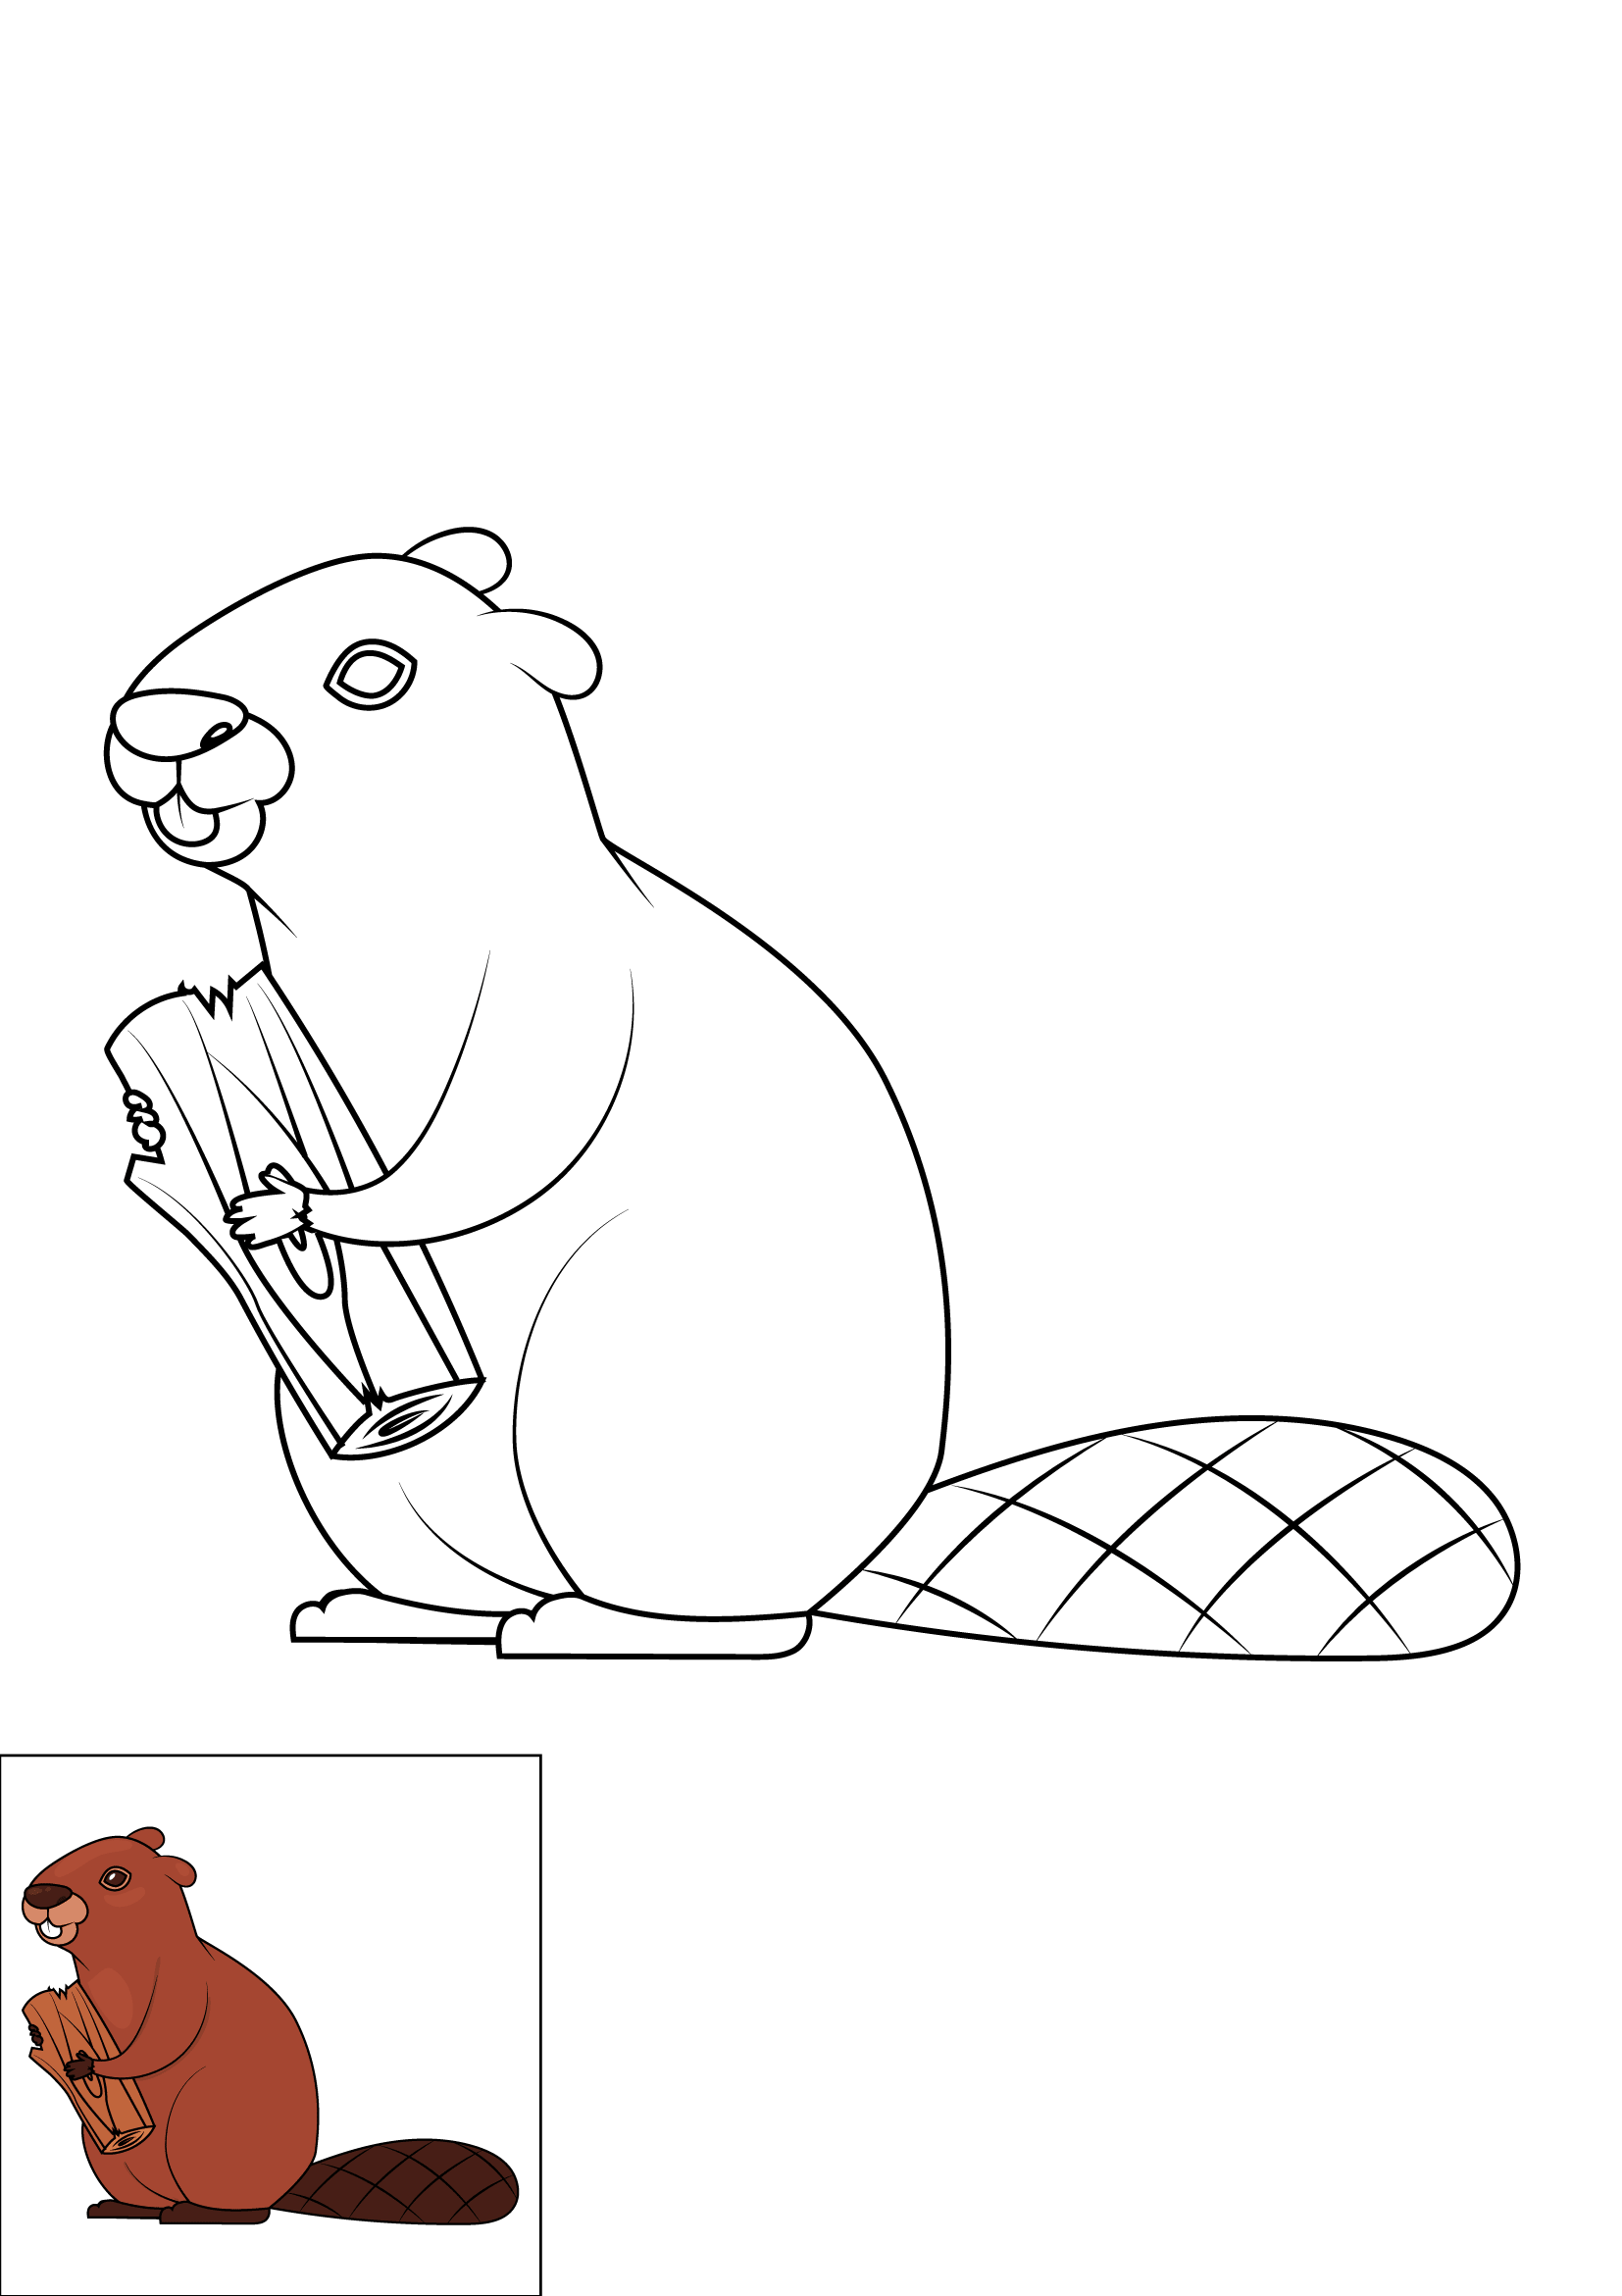 How to Draw A Beaver Step by Step Printable Color